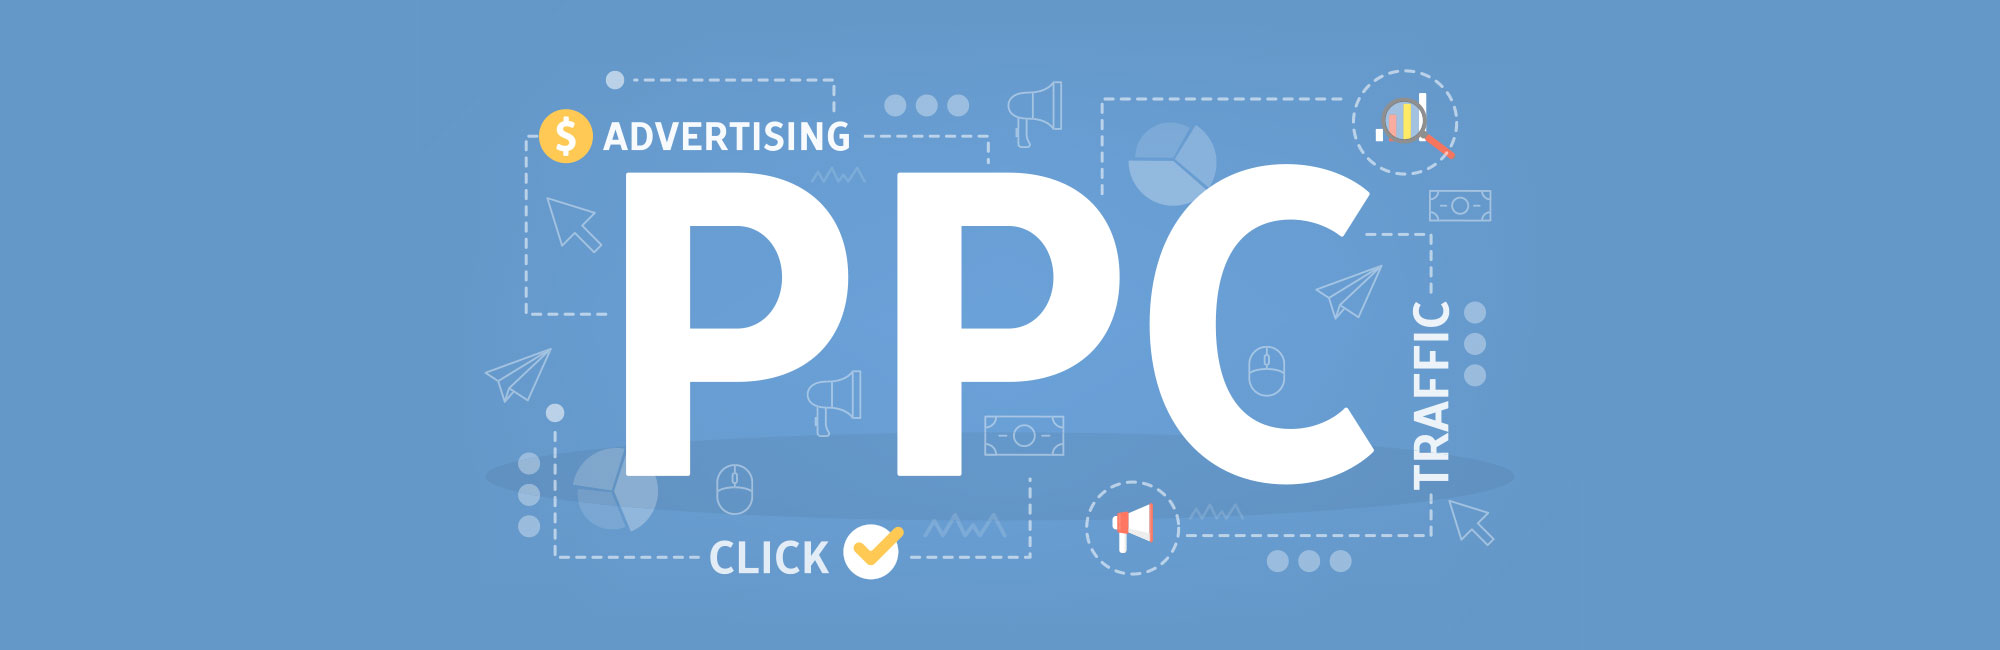 A Basic guide to PPC Marketing